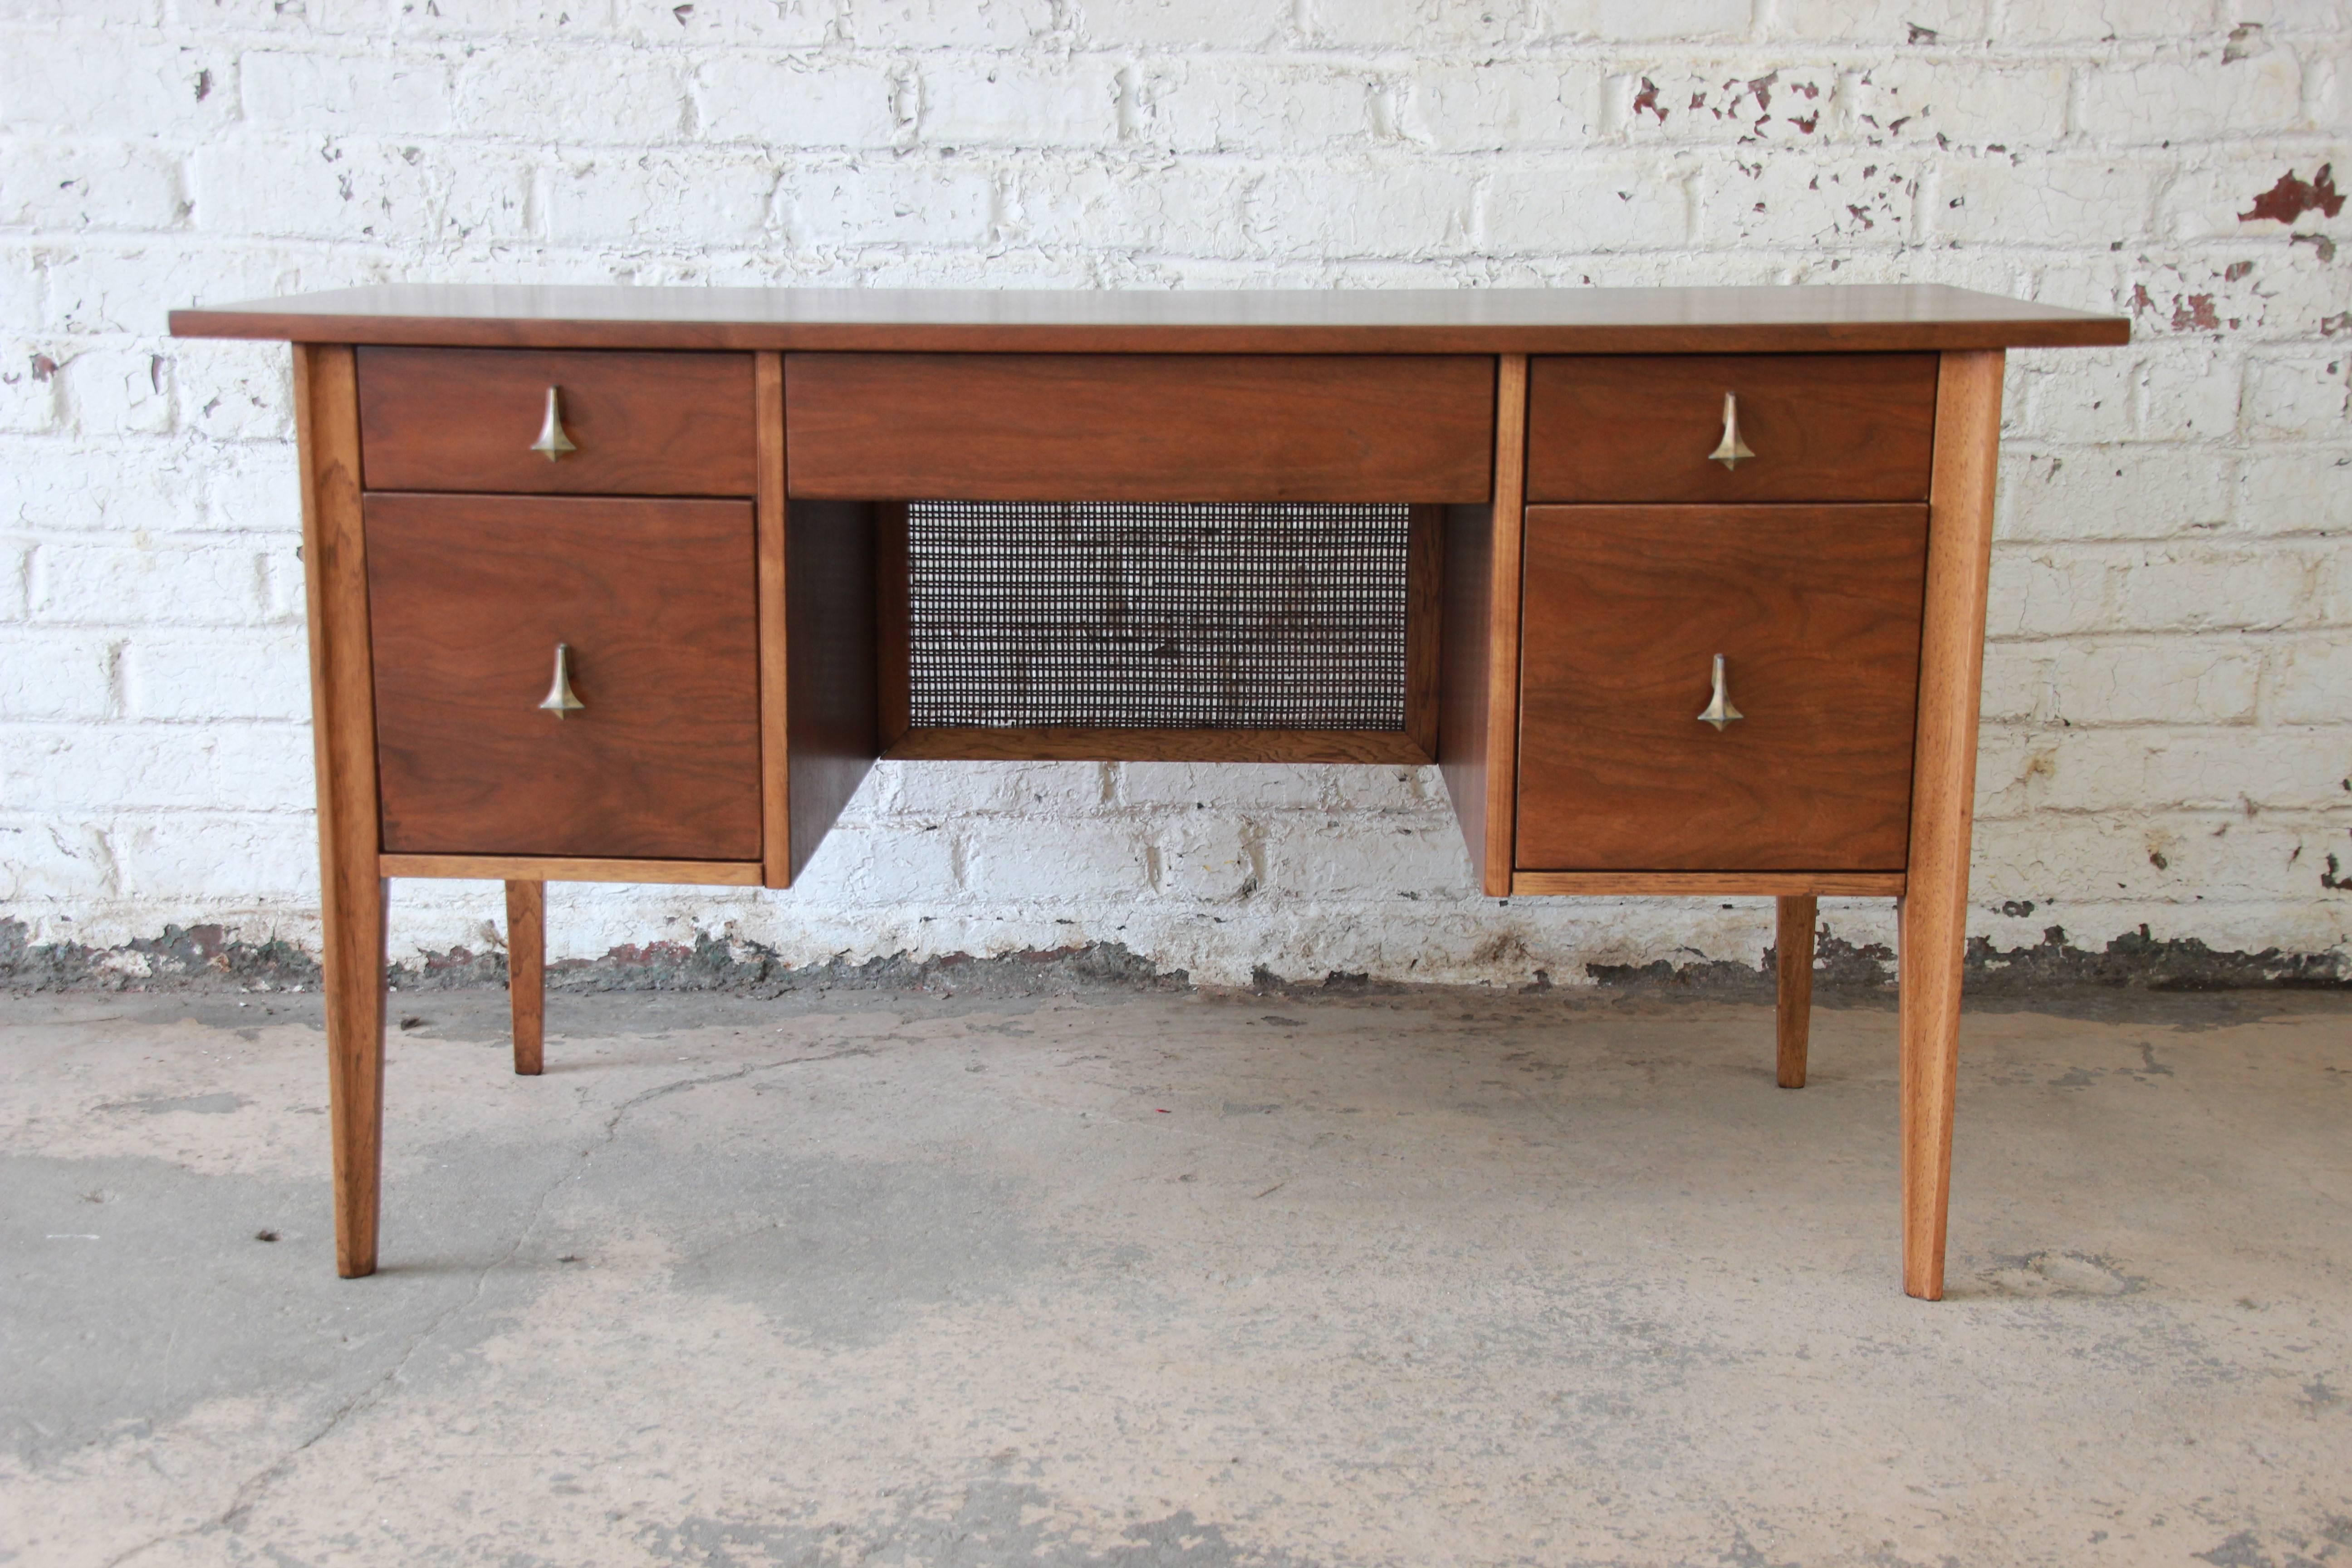 A rare and exceptional Broyhill Brasilia Mid-Century Modern sculpted walnut desk. The desk features gorgeous two-tone walnut wood grain and sleek midcentury design. It offers ample room for storage, with five dovetailed drawers. The desk is finished